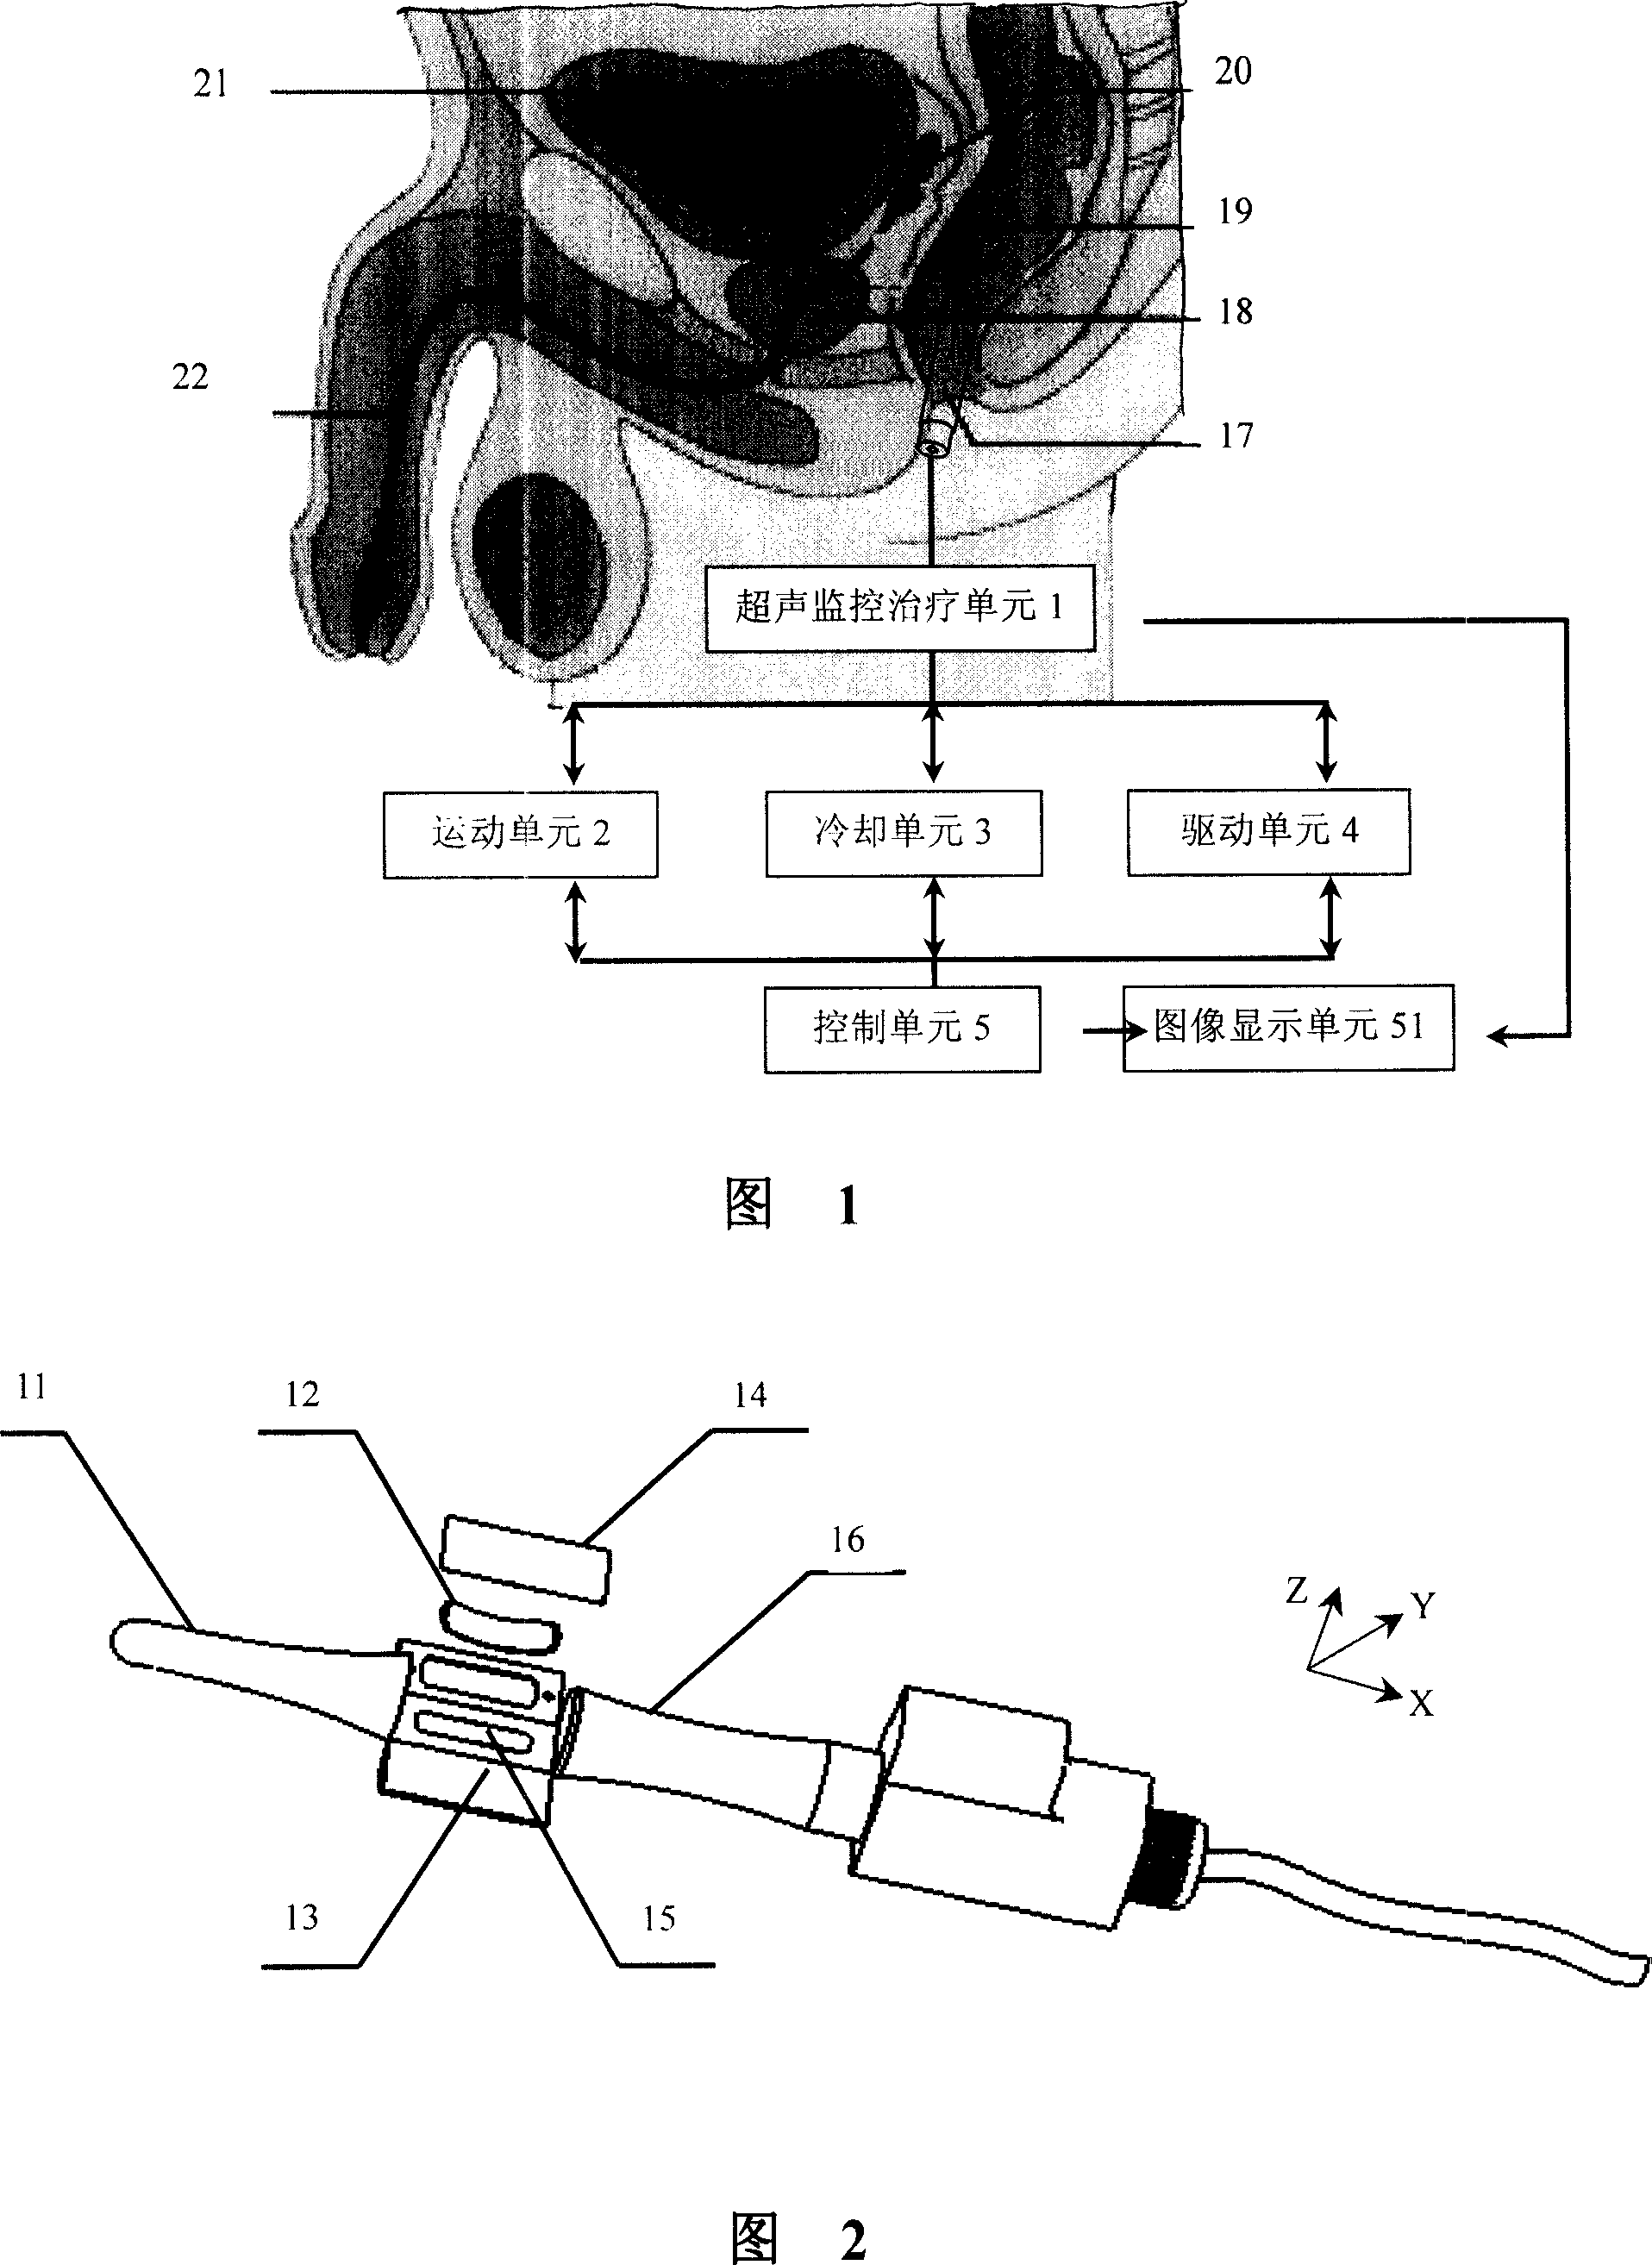 Ultrasonic device for treating prostate disease